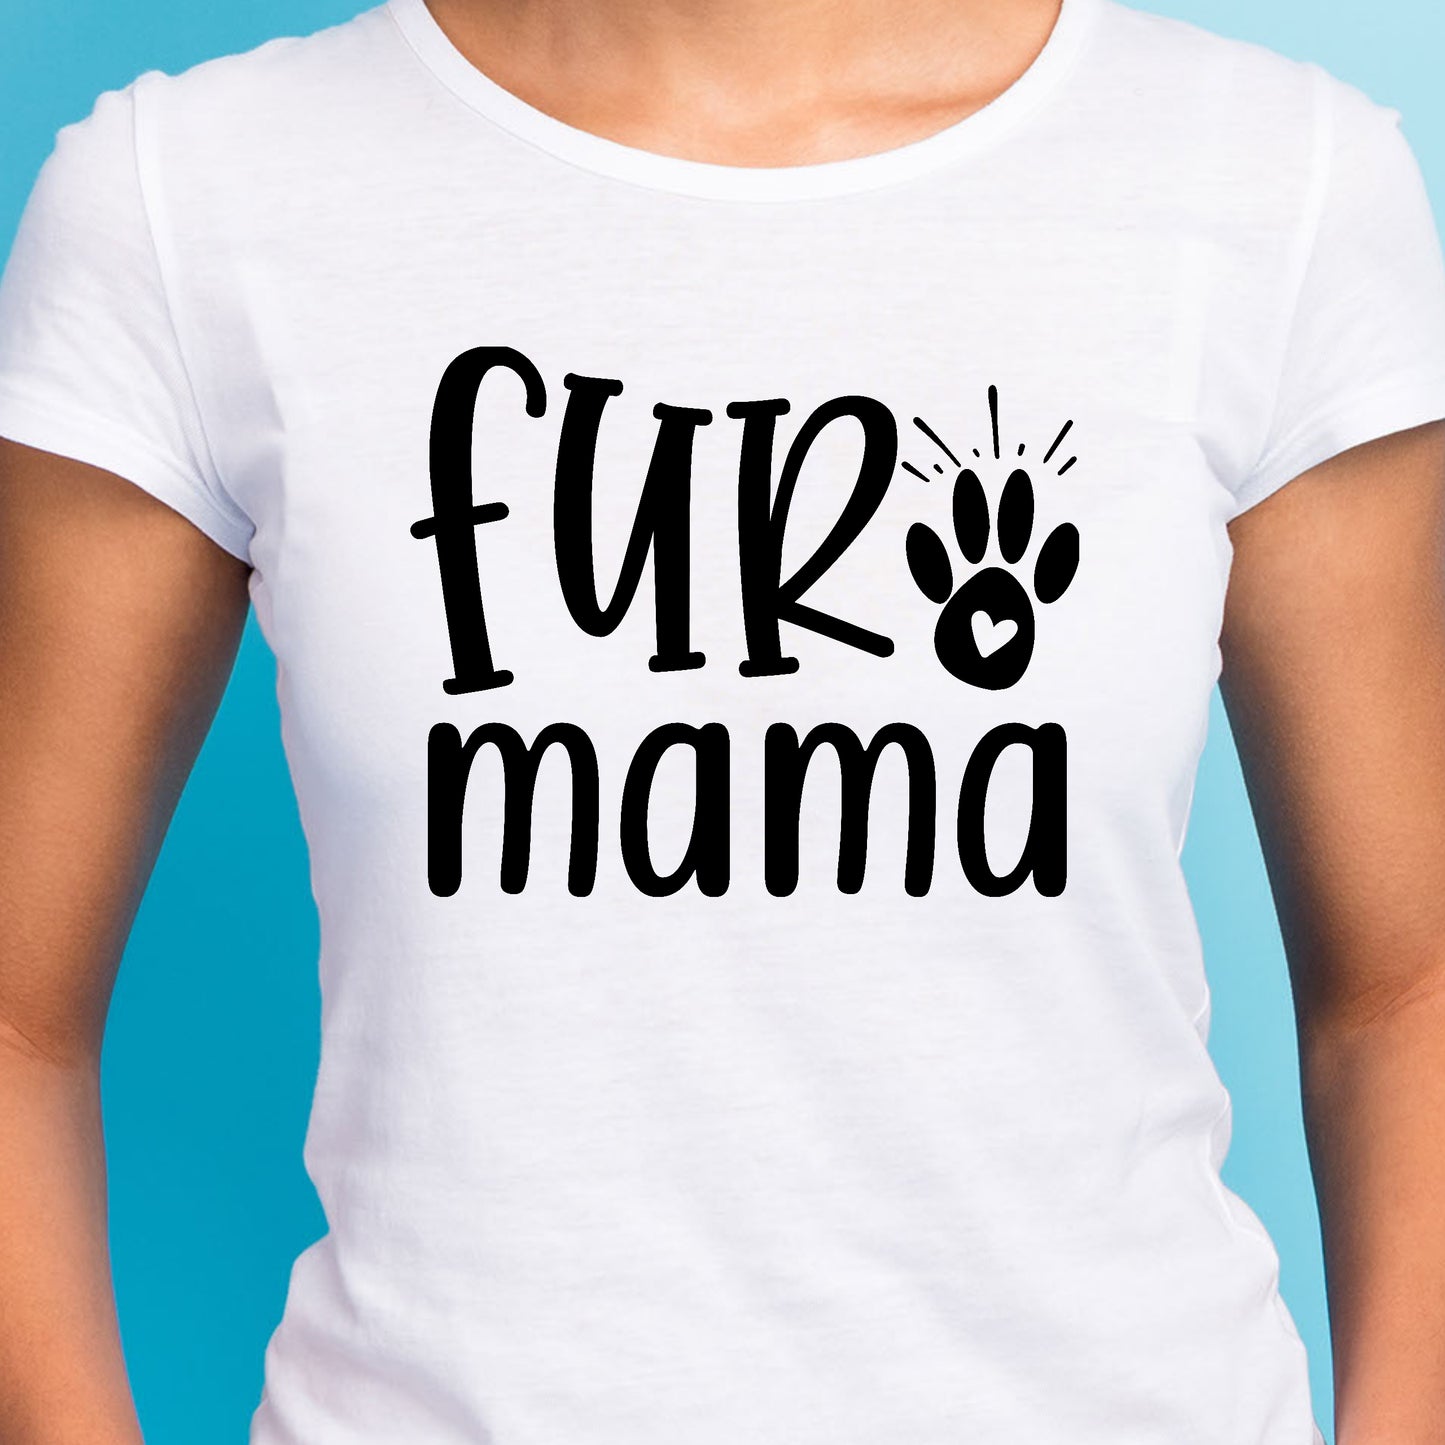 Fur Mama T-Shirt For Mother's Day Gift For Pet Owner Gift For Fur Baby TShirt For Pet Mom T Shirt For Animal Lover Shirt Cute Pet Mom Tee